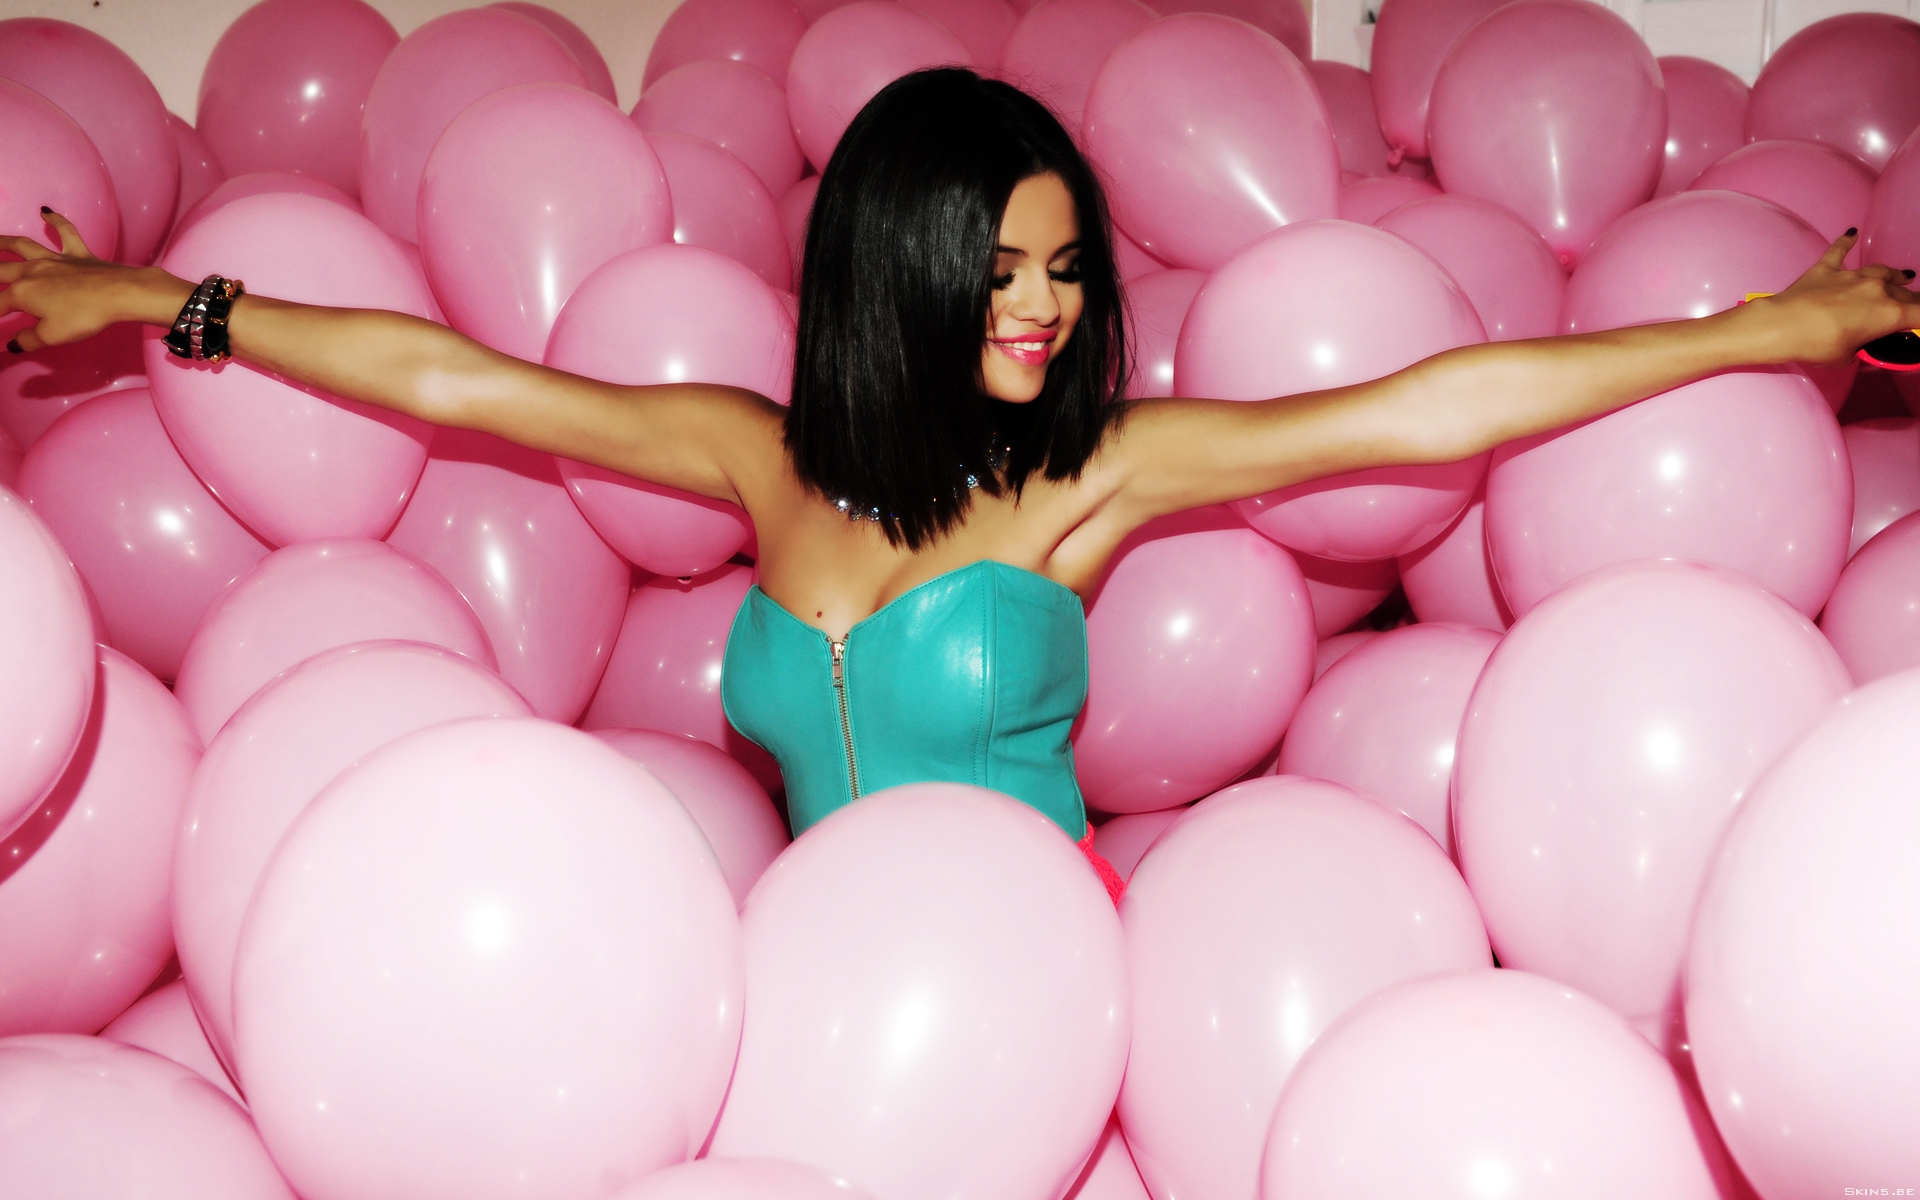 selena gomez, music, balloon for android